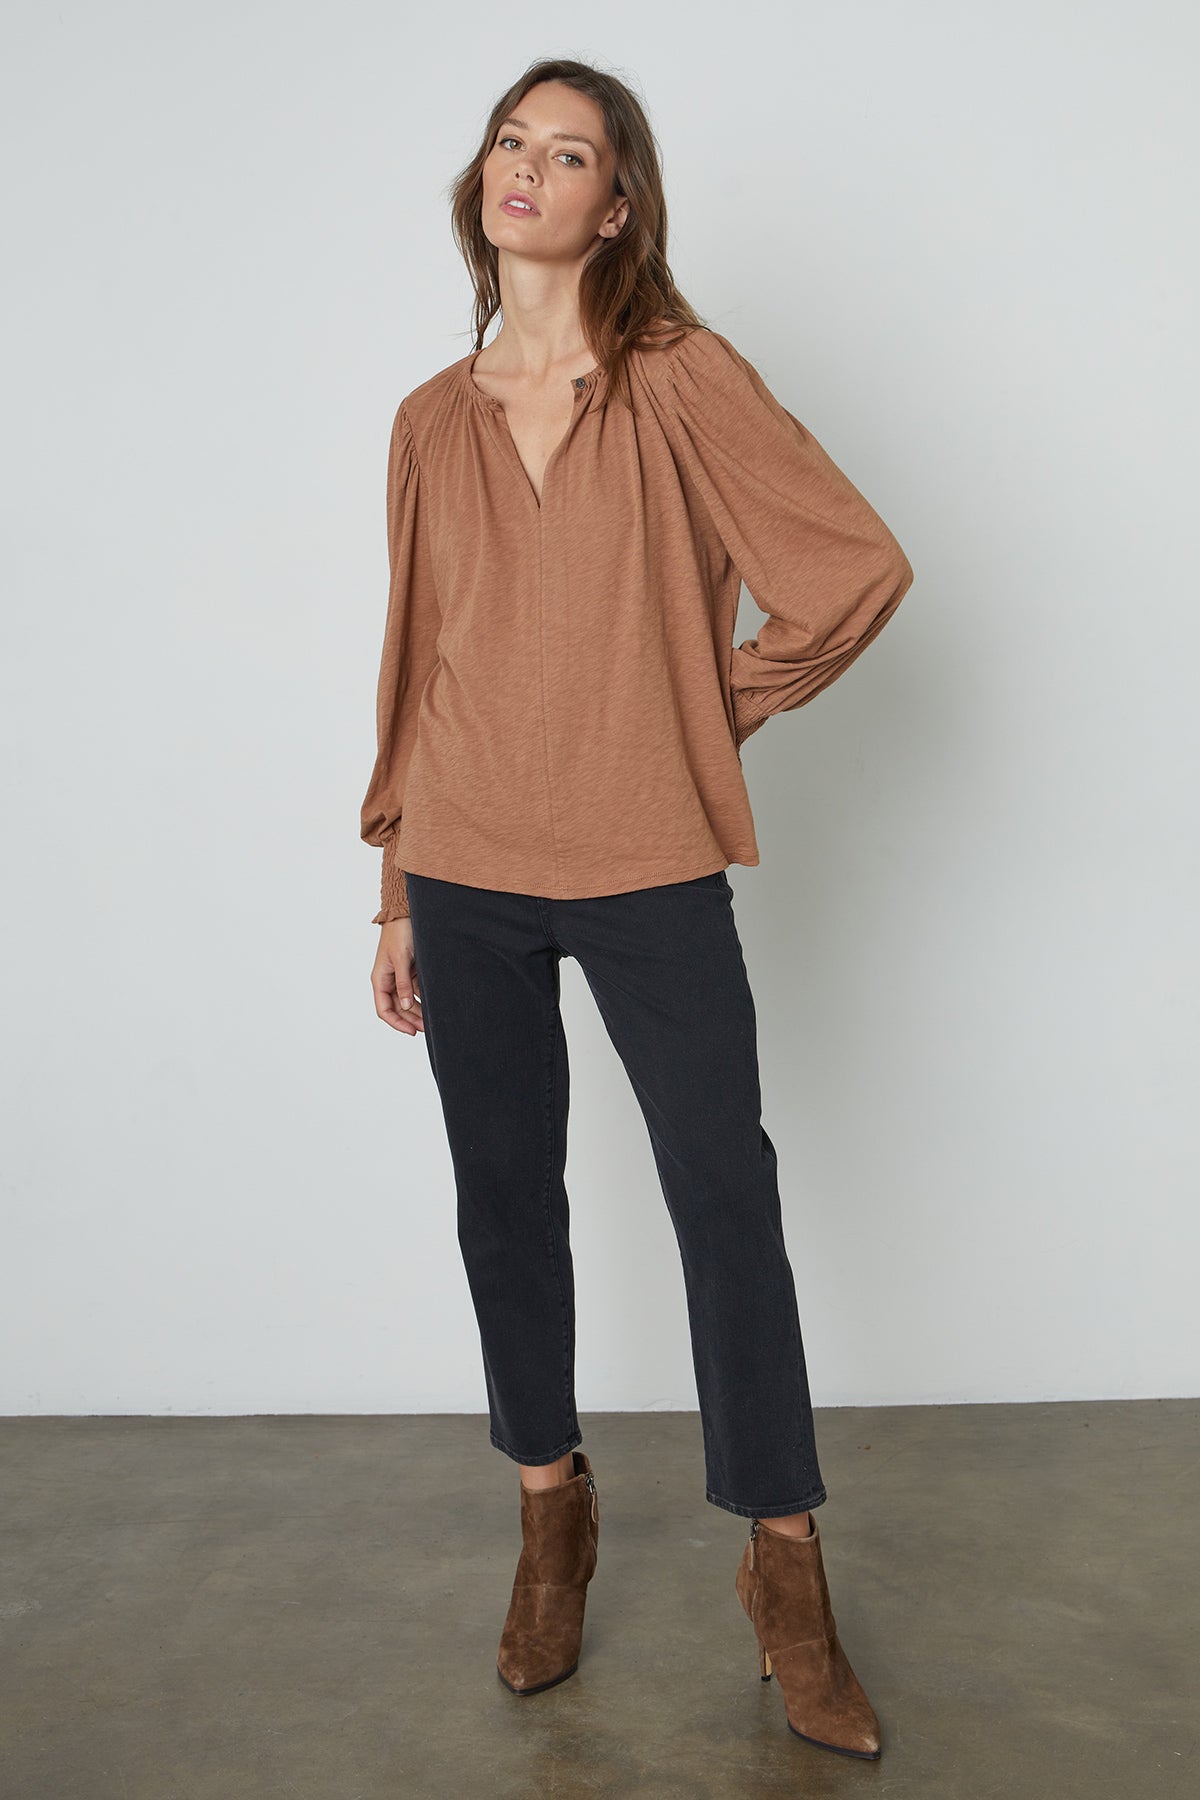   Irina Split Neck Tee in Camel front view with denim and boots 